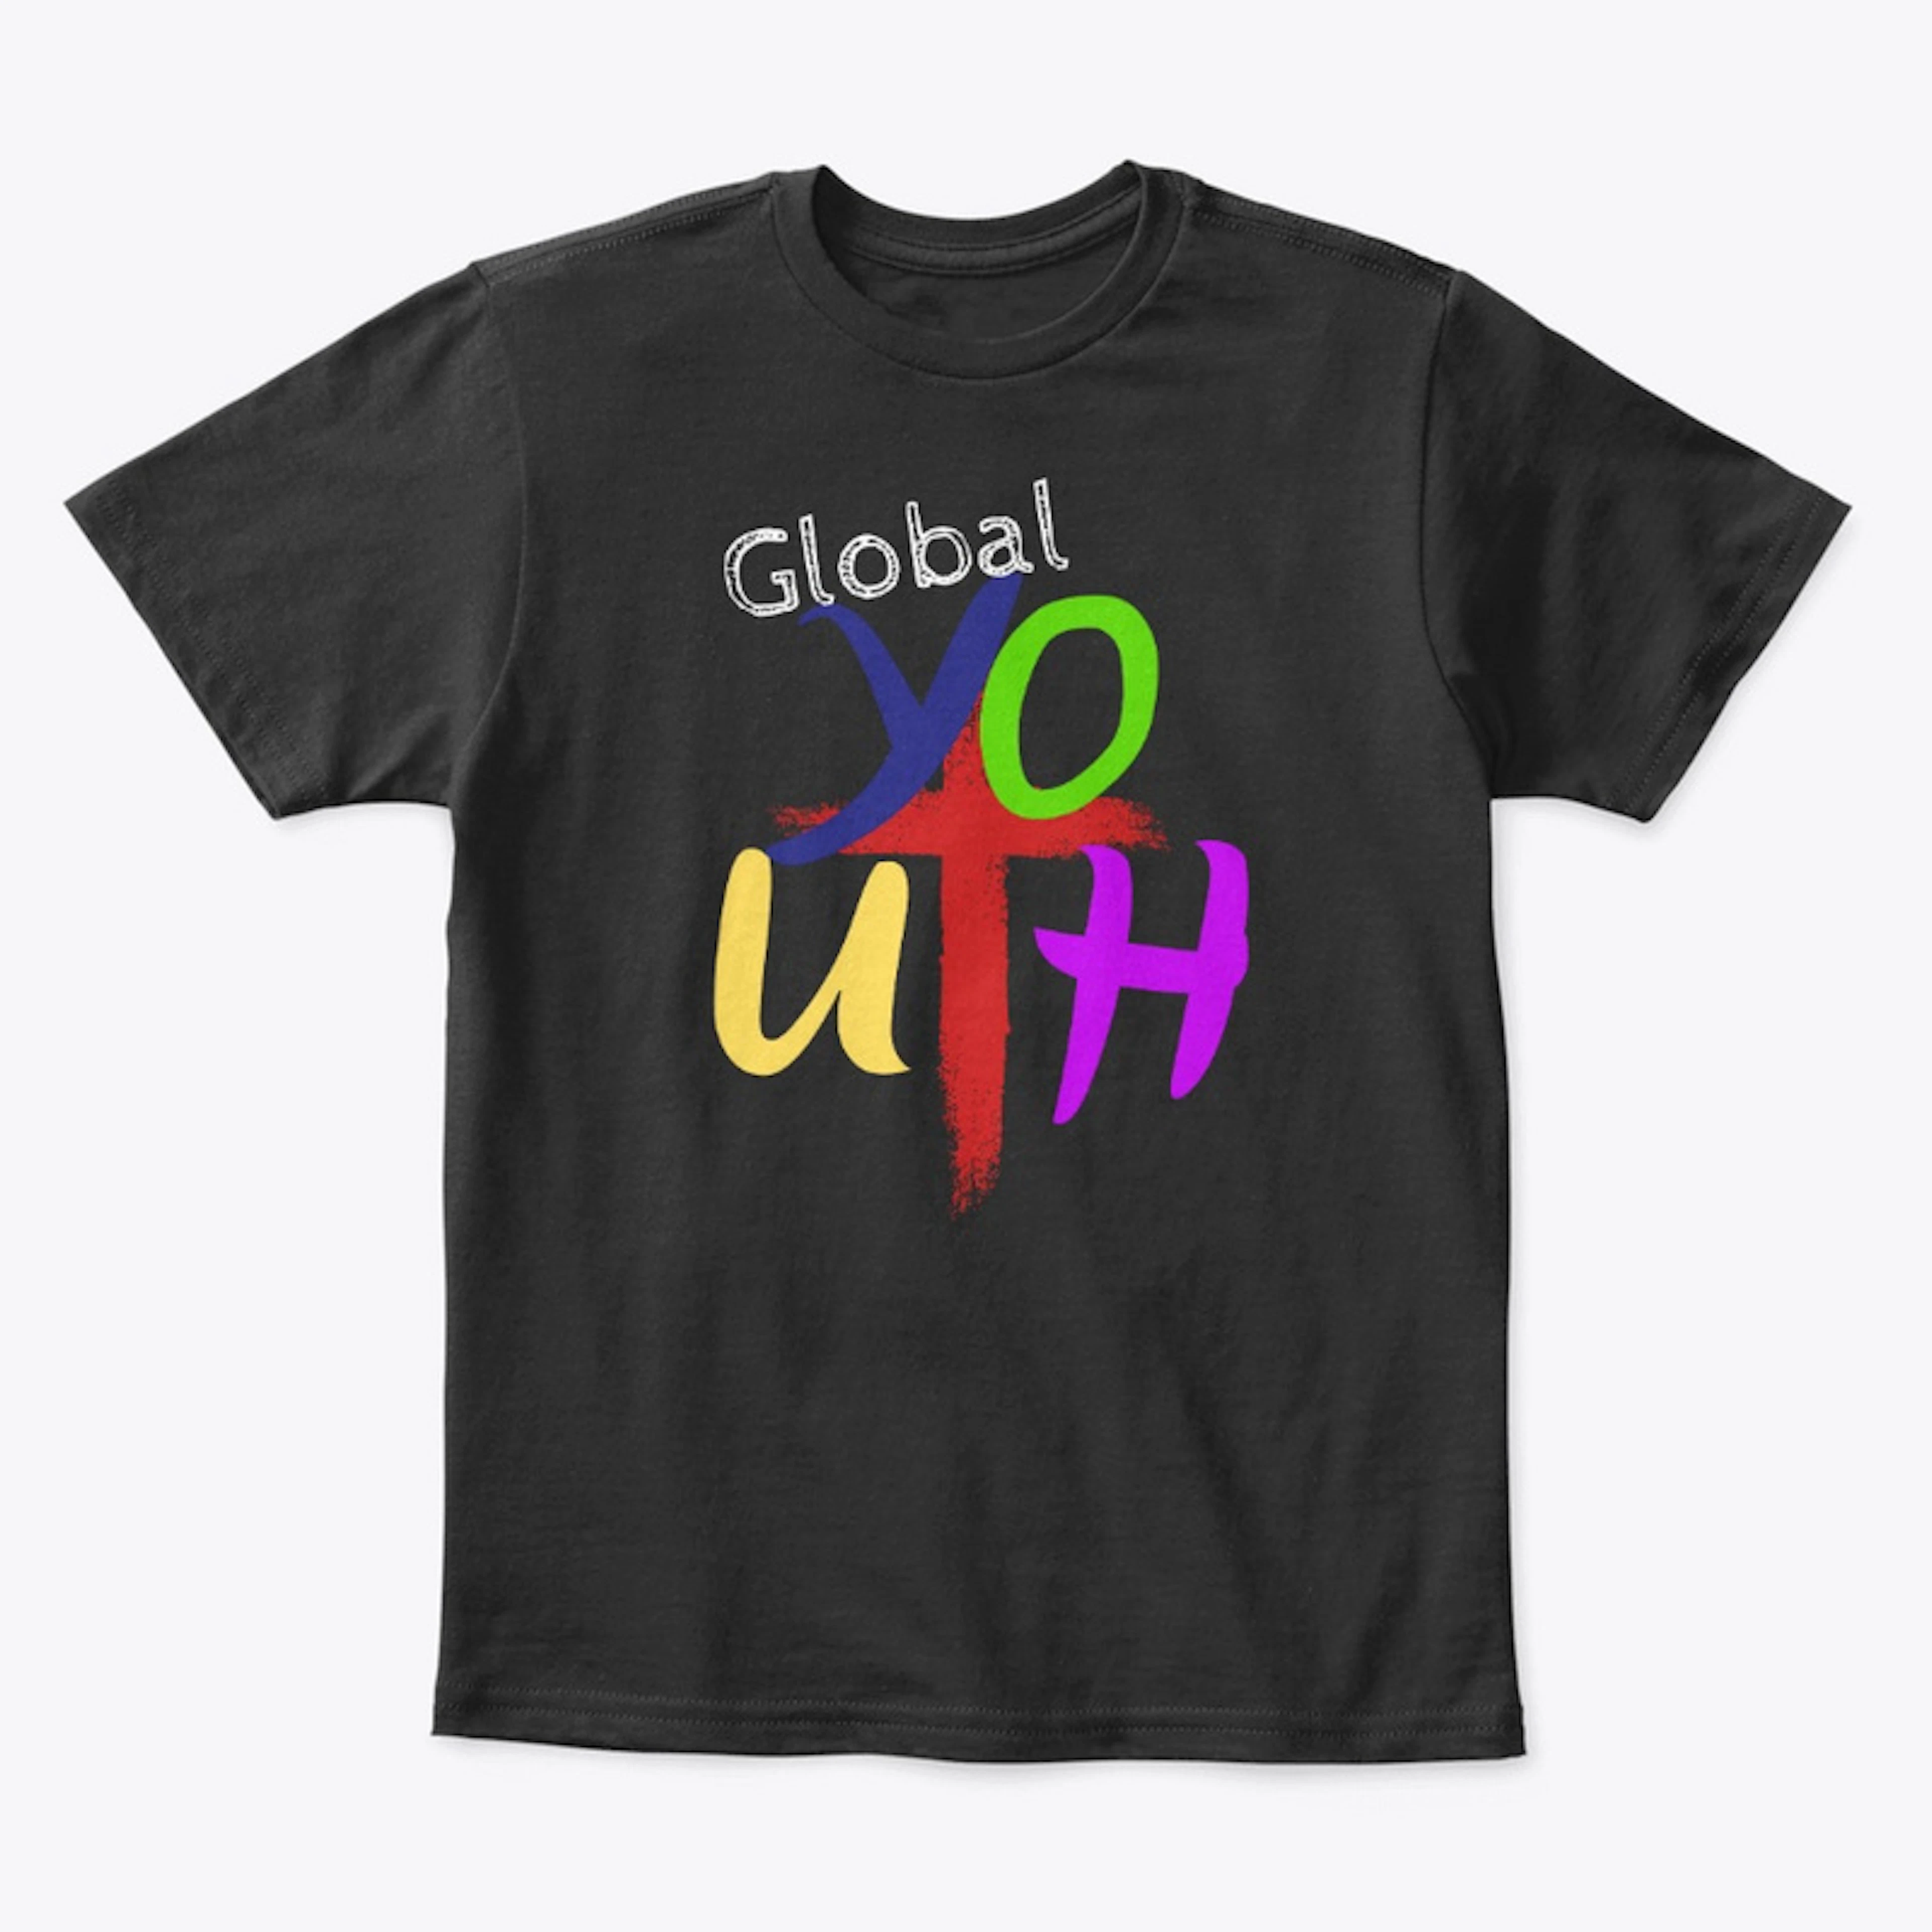 Global Youth Colorful Tee